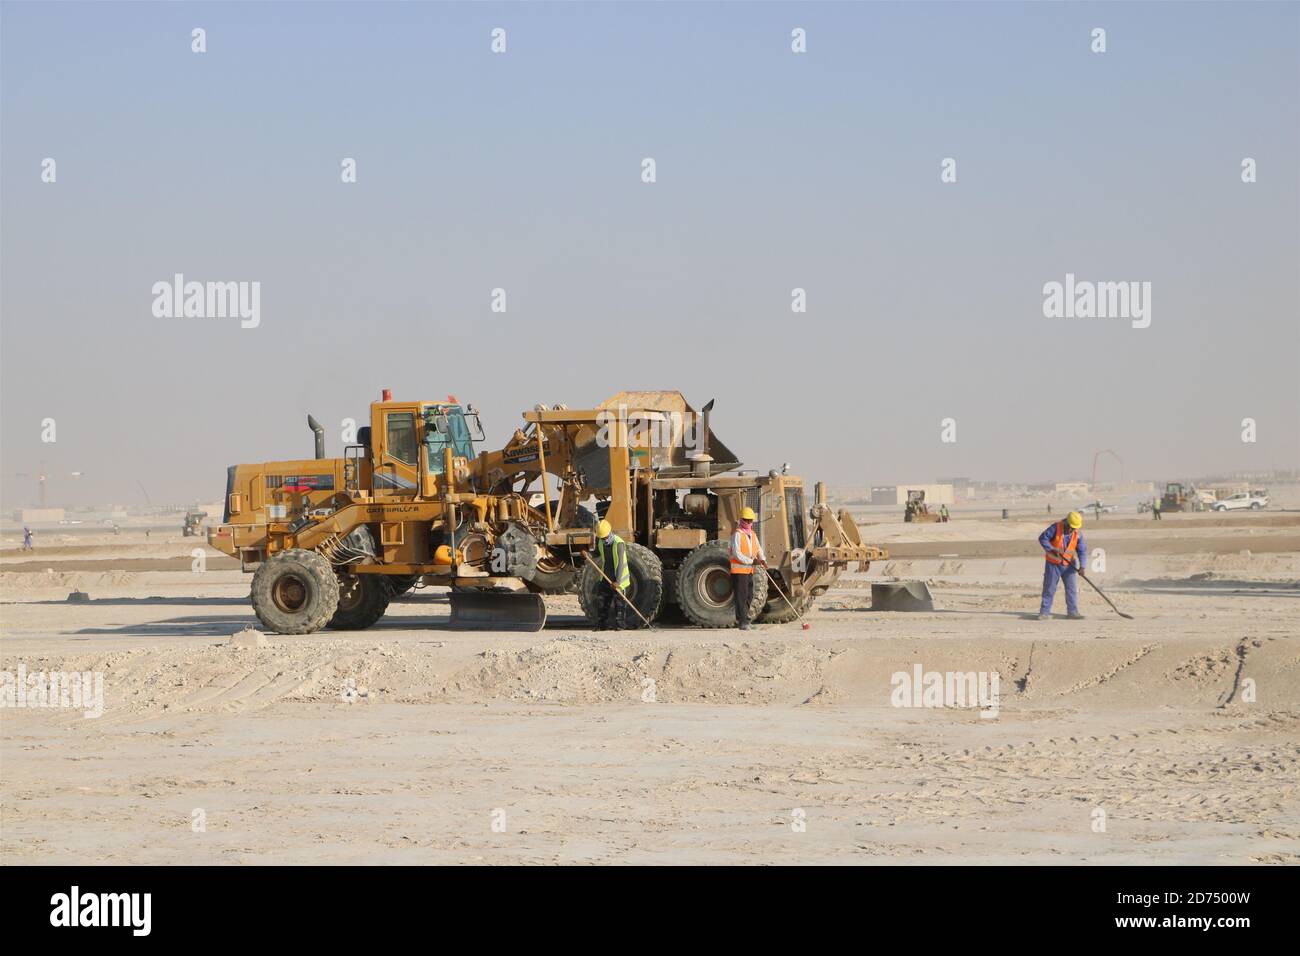 Jahra Governorate, Kuwait. 19th Oct, 2020. Construction machines work at the construction site of a project of China Gezhouba Group Corporation (CGGC) in desert of Jahra Governorate, Kuwait, Oct. 19, 2020. China Gezhouba Group Corporation (CGGC) handed over on Tuesday the first batch of its housing infrastructure project to the Kuwaiti side, injecting new momentum into Kuwait's economy and livelihood. Credit: Liu Lianghaoyue/Xinhua/Alamy Live News Stock Photo